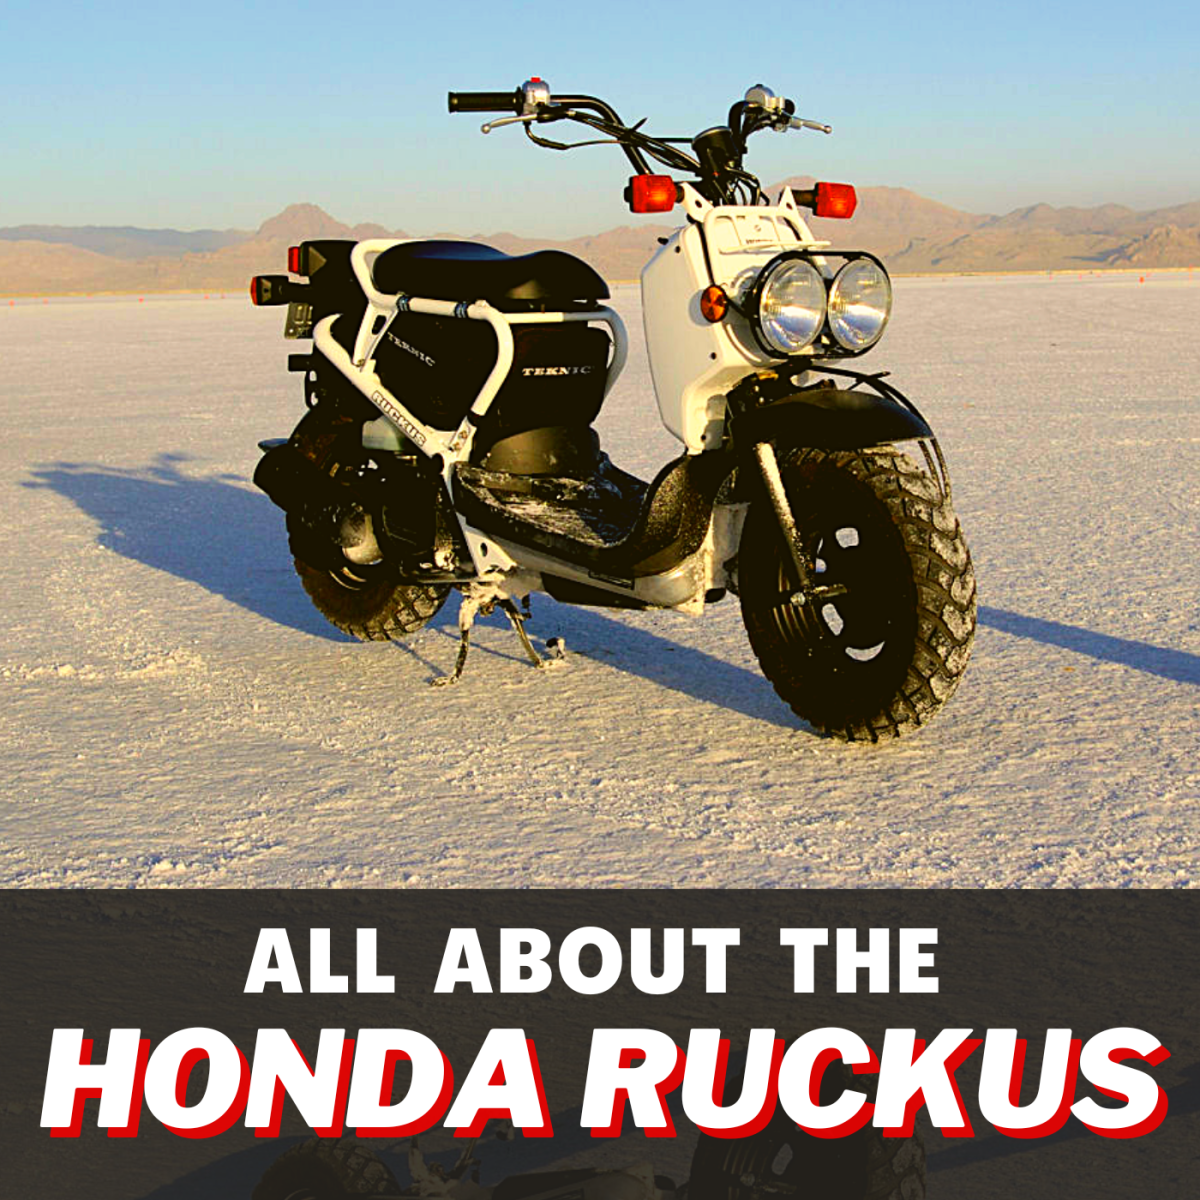 Everything you need to know about the Honda Ruckus.